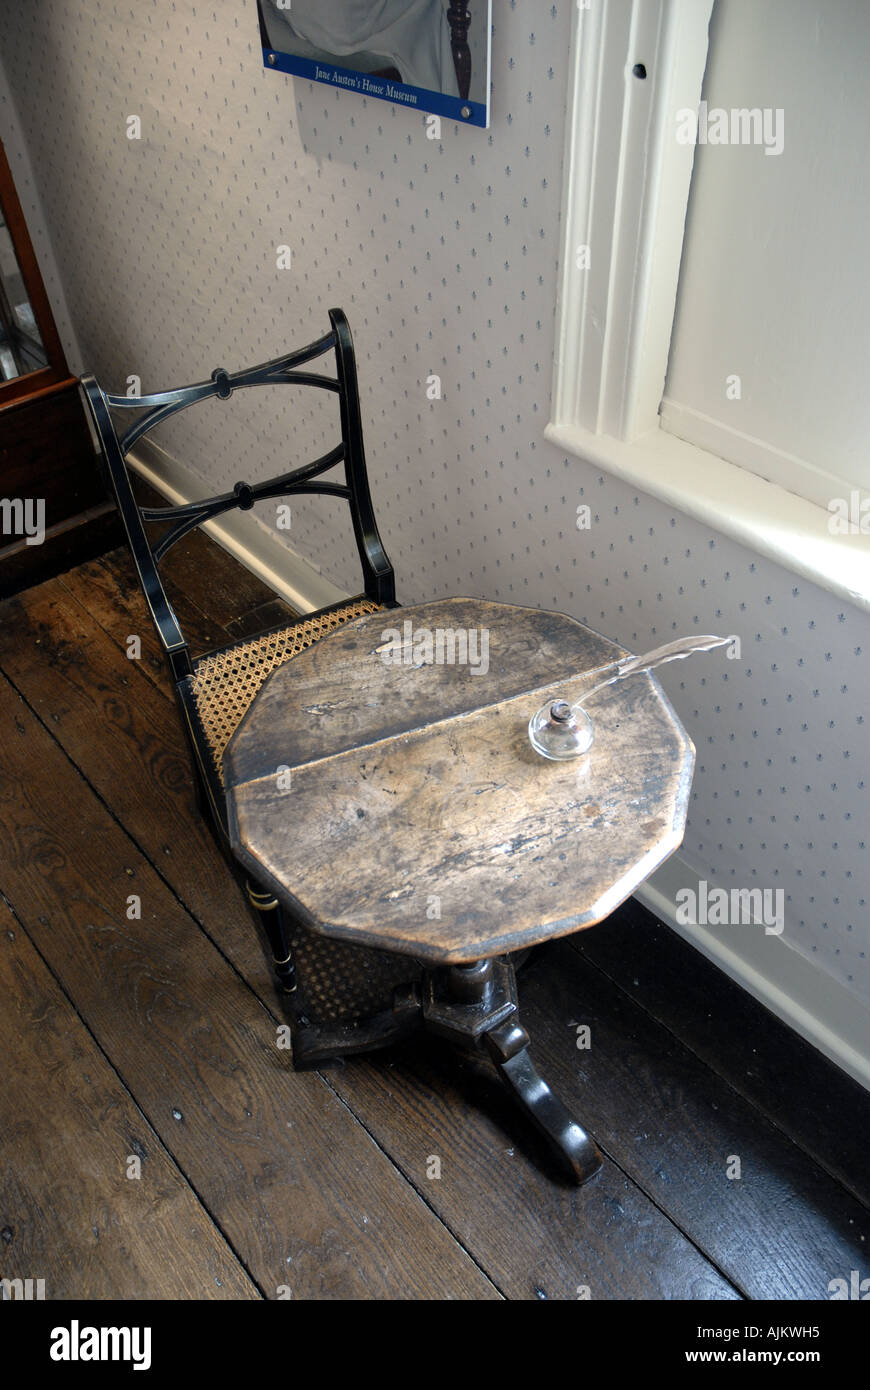 The Writing Desk Jane Austen Used At Her House At Chawton